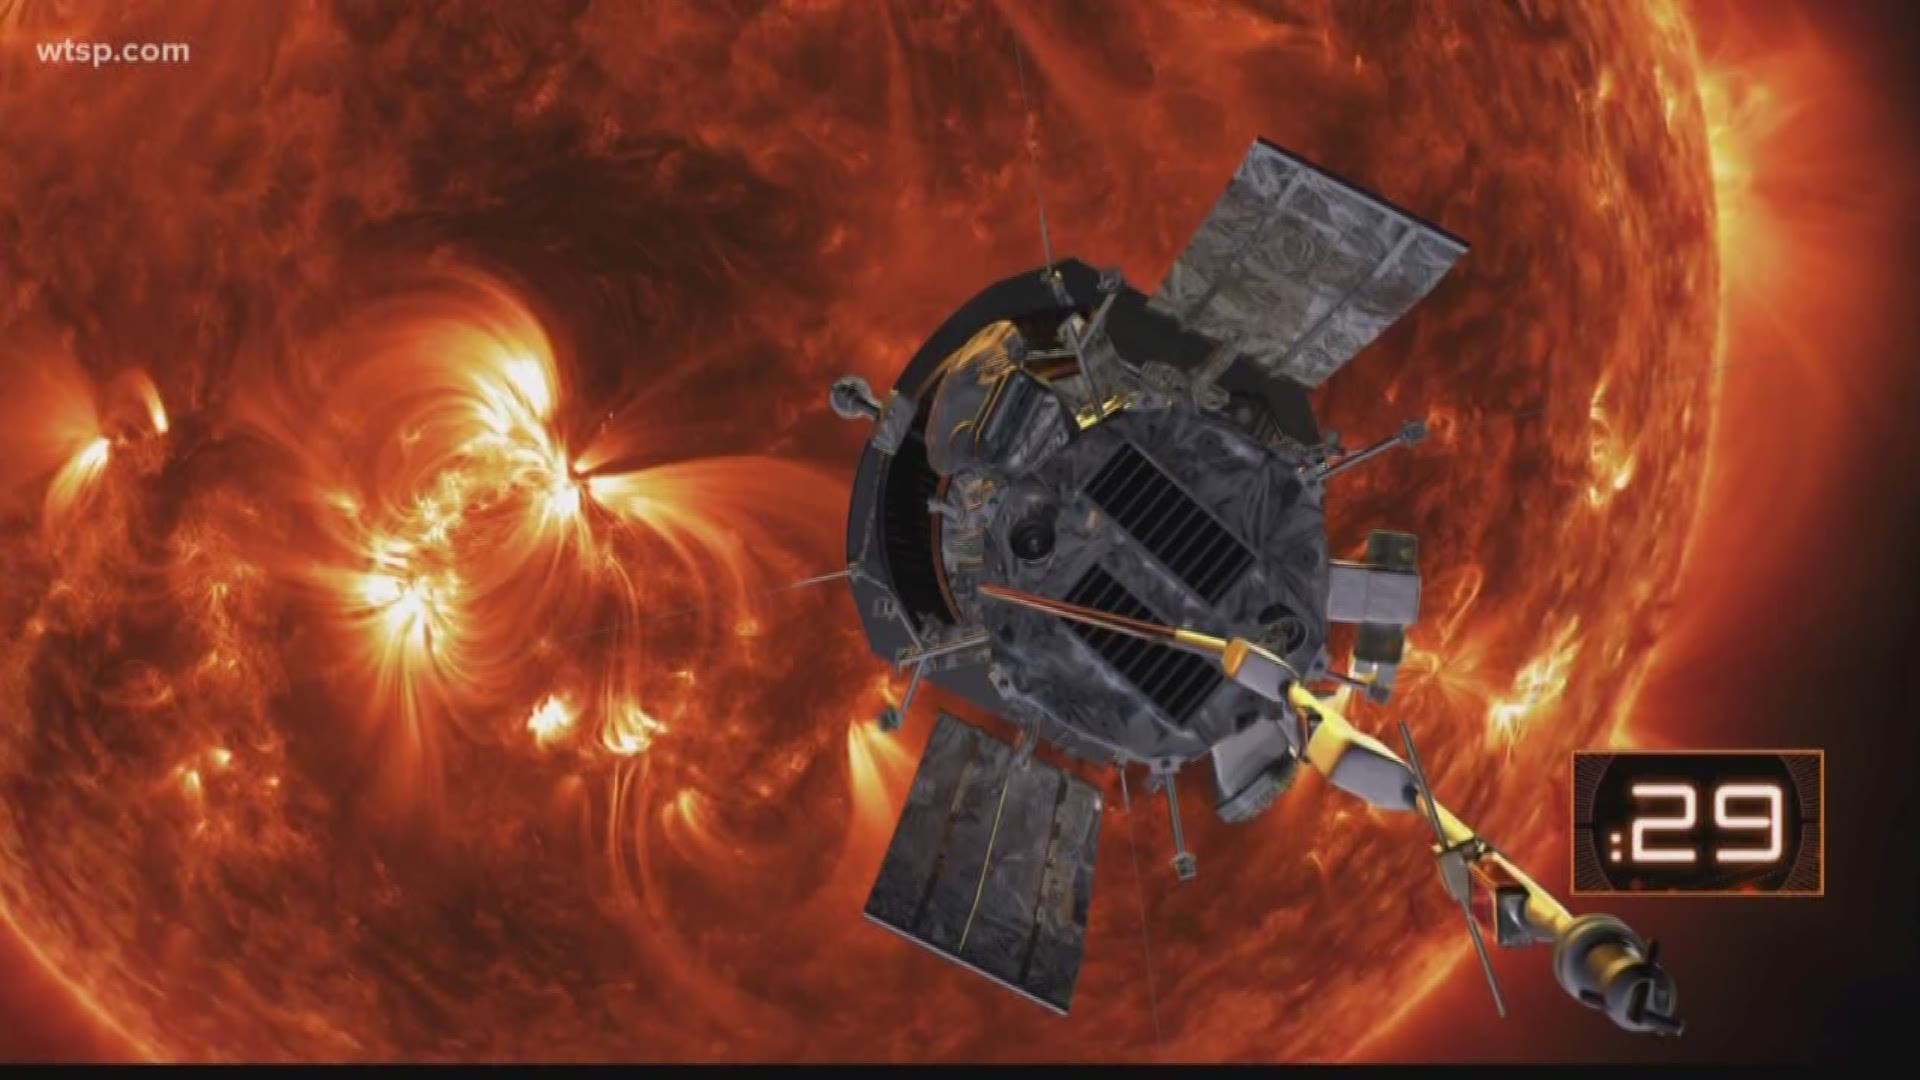 It's been more than a year since the Parker Solar Probe launched into space with the goal of "touching the sun."